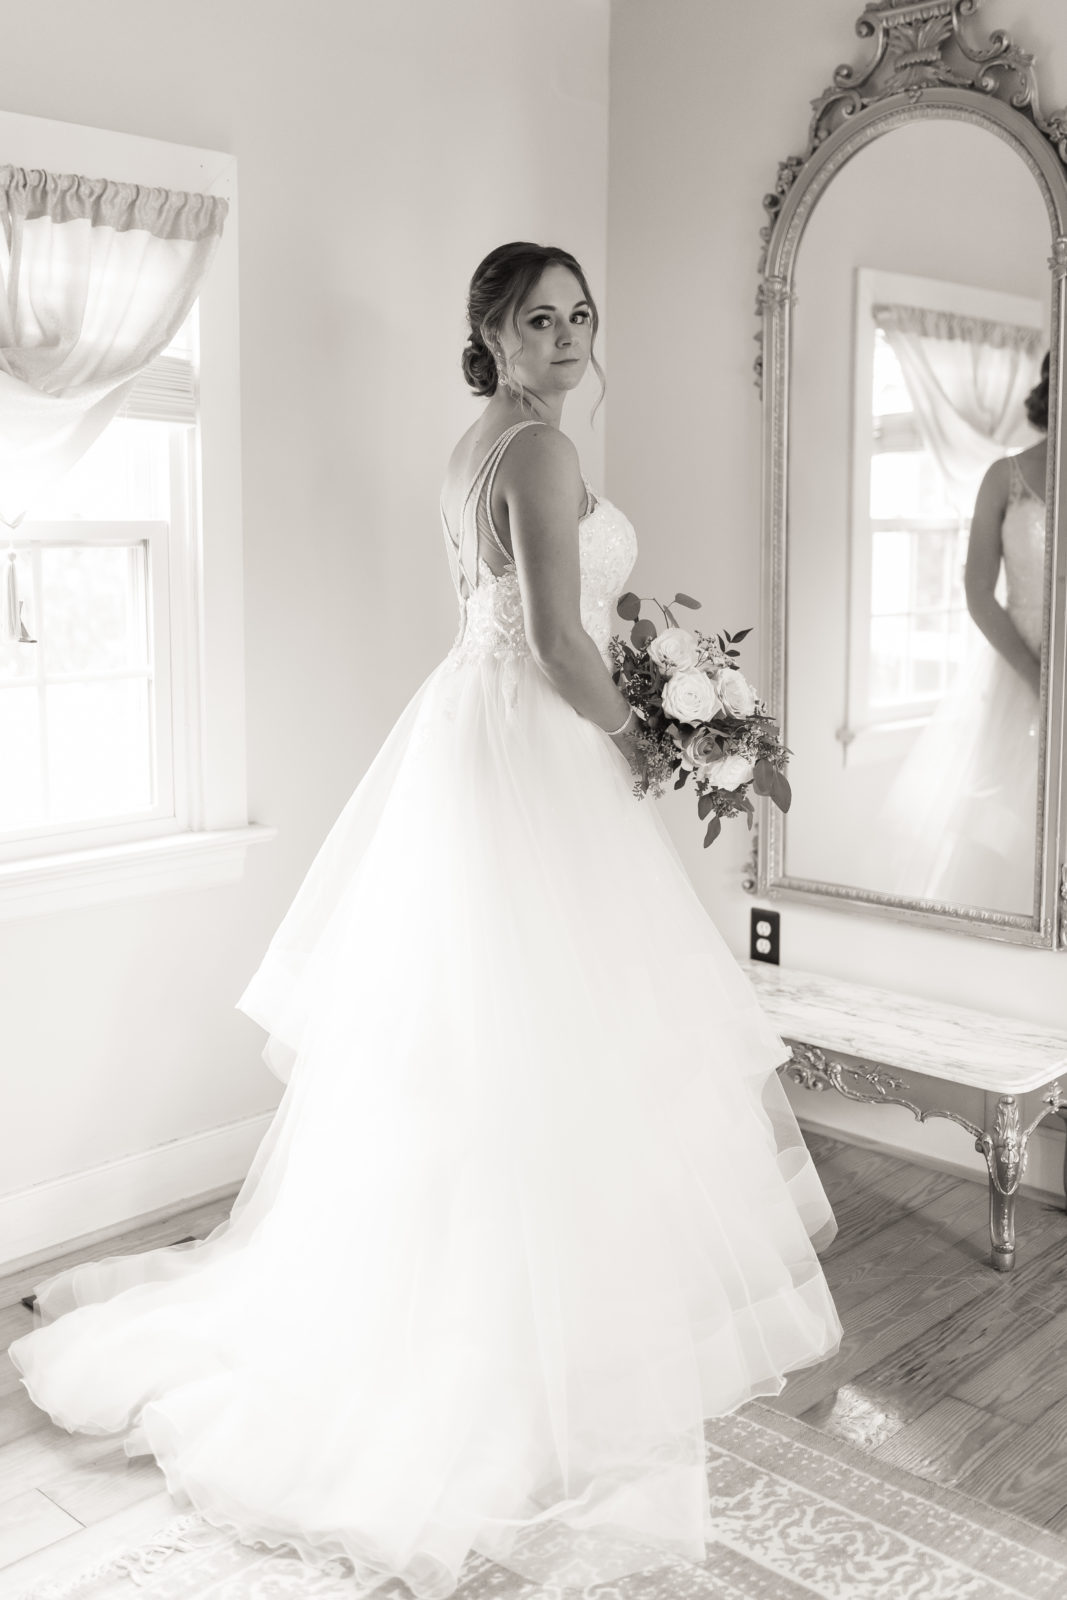 Bride looking in mirror at her dress